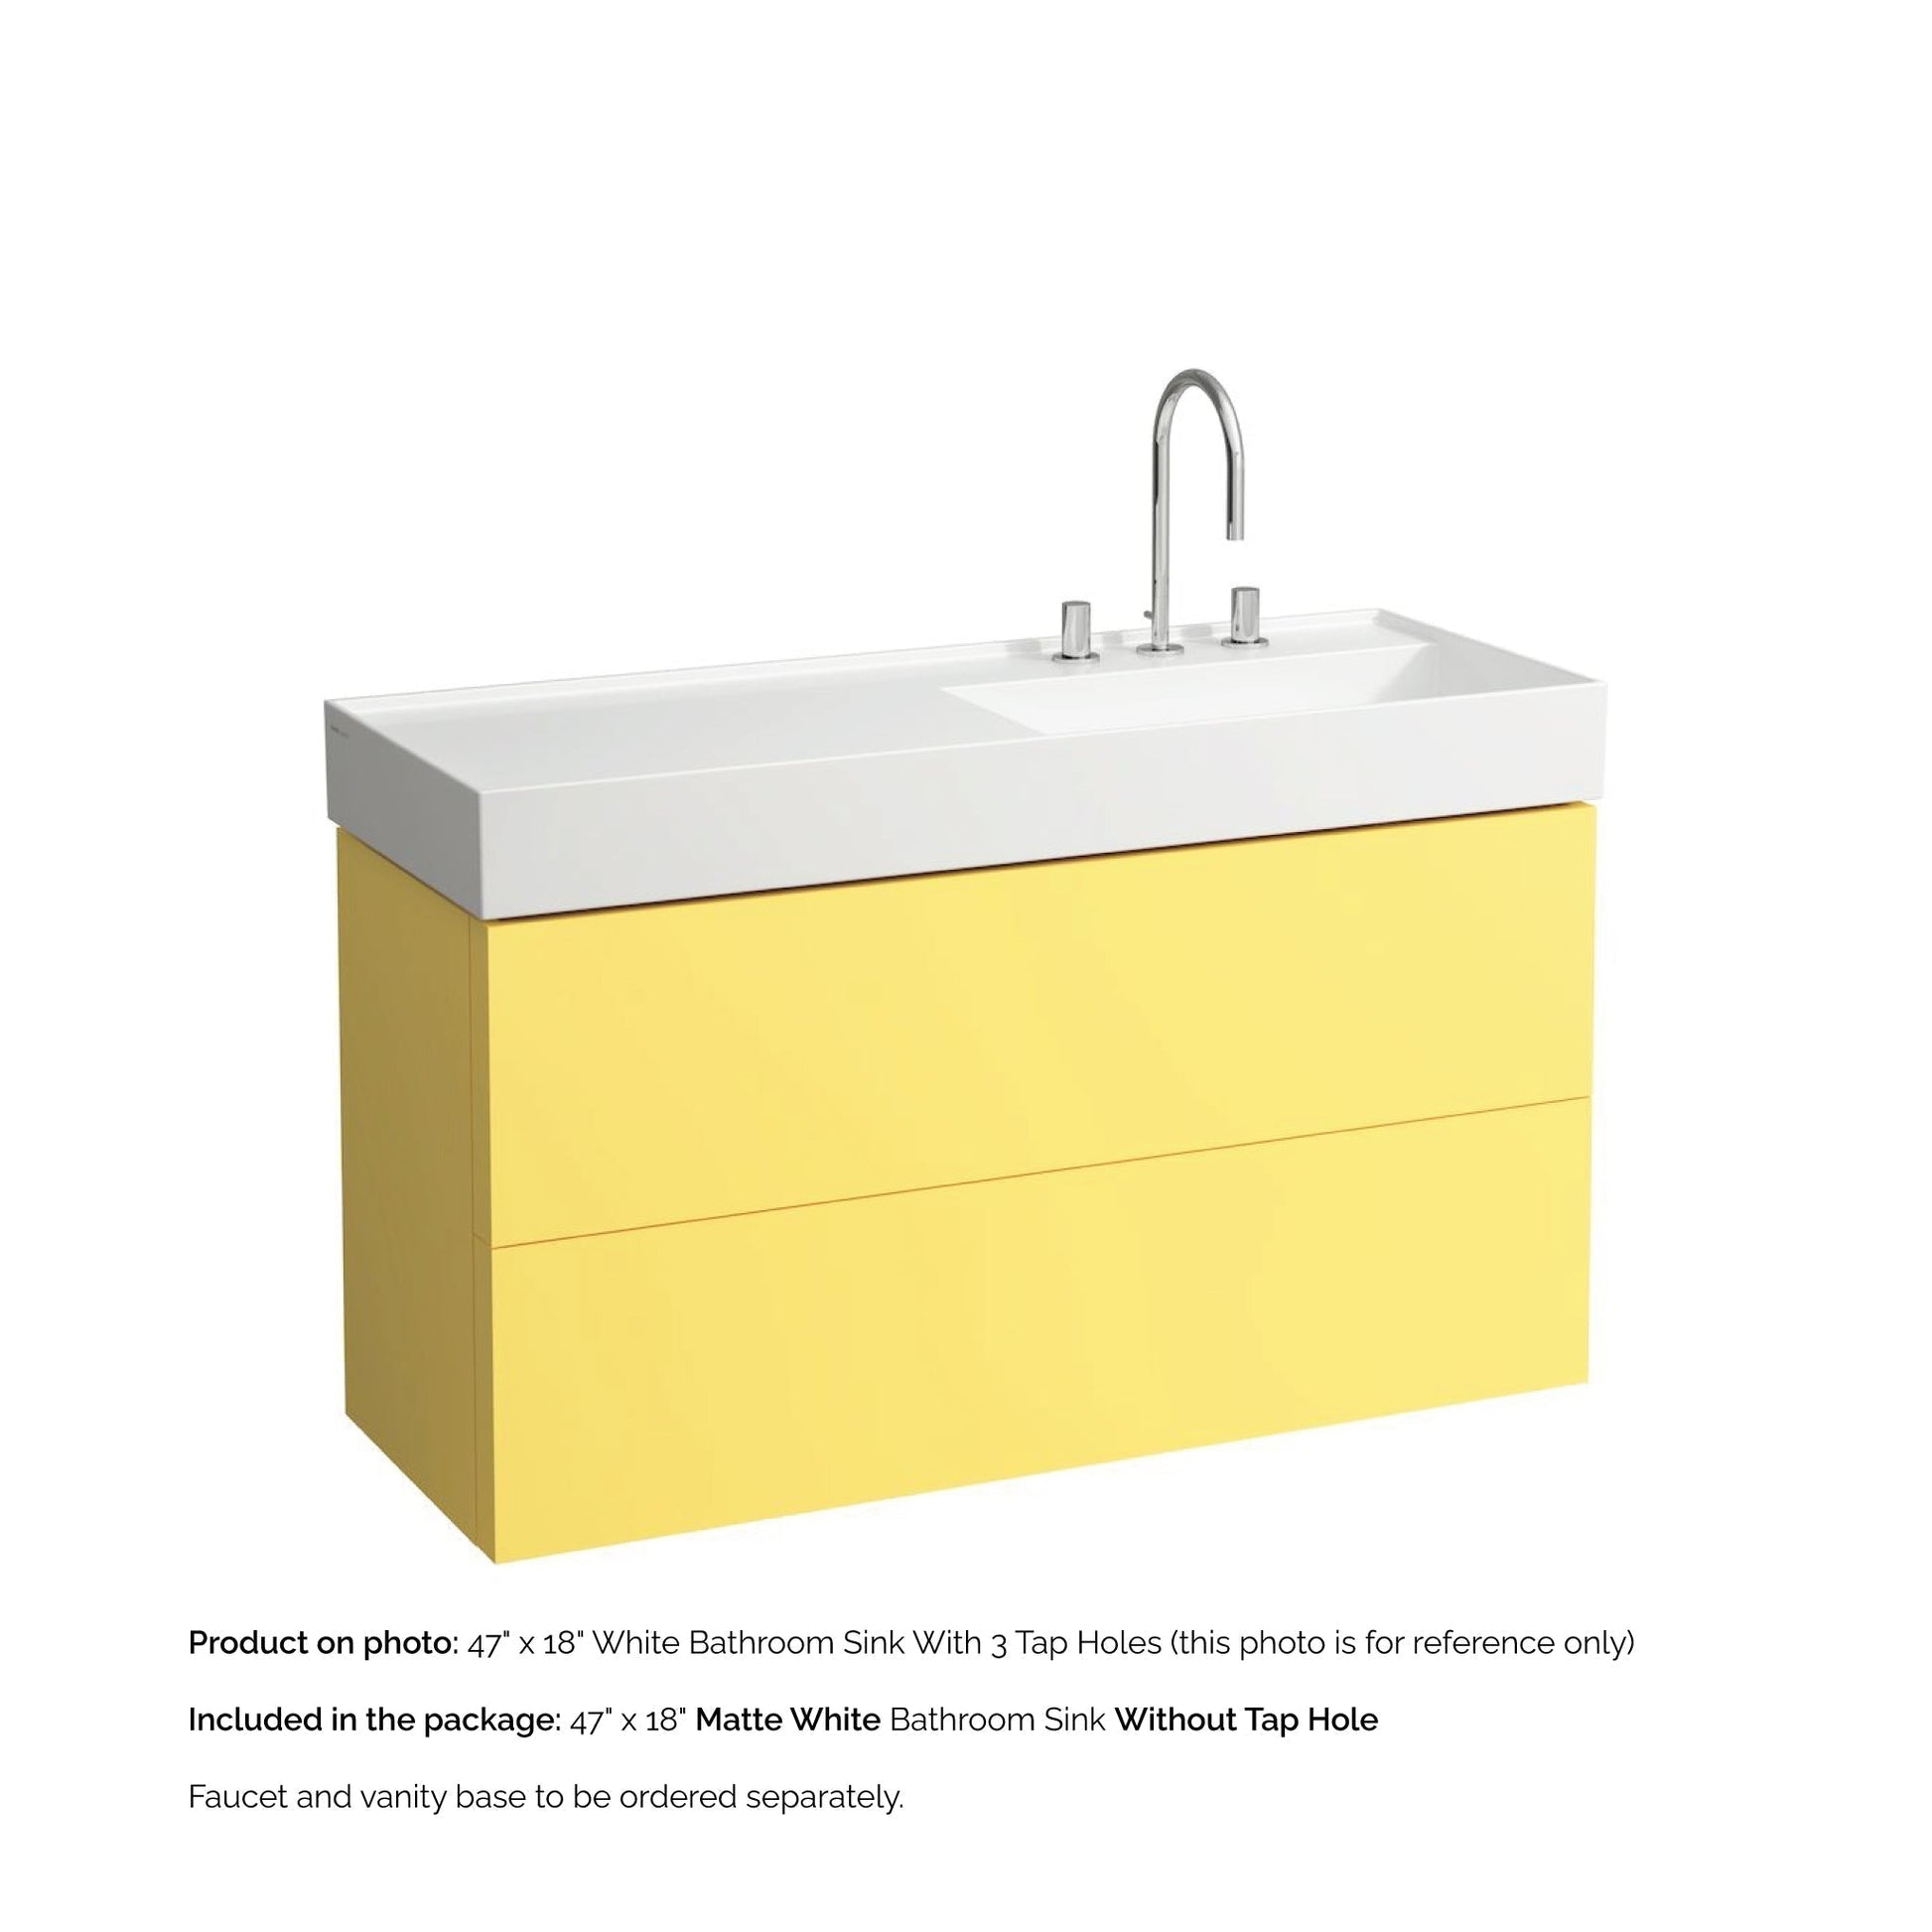 Laufen Kartell 47" x 18" Matte White Wall-Mounted Shelf-Left Bathroom Sink Without Faucet Hole